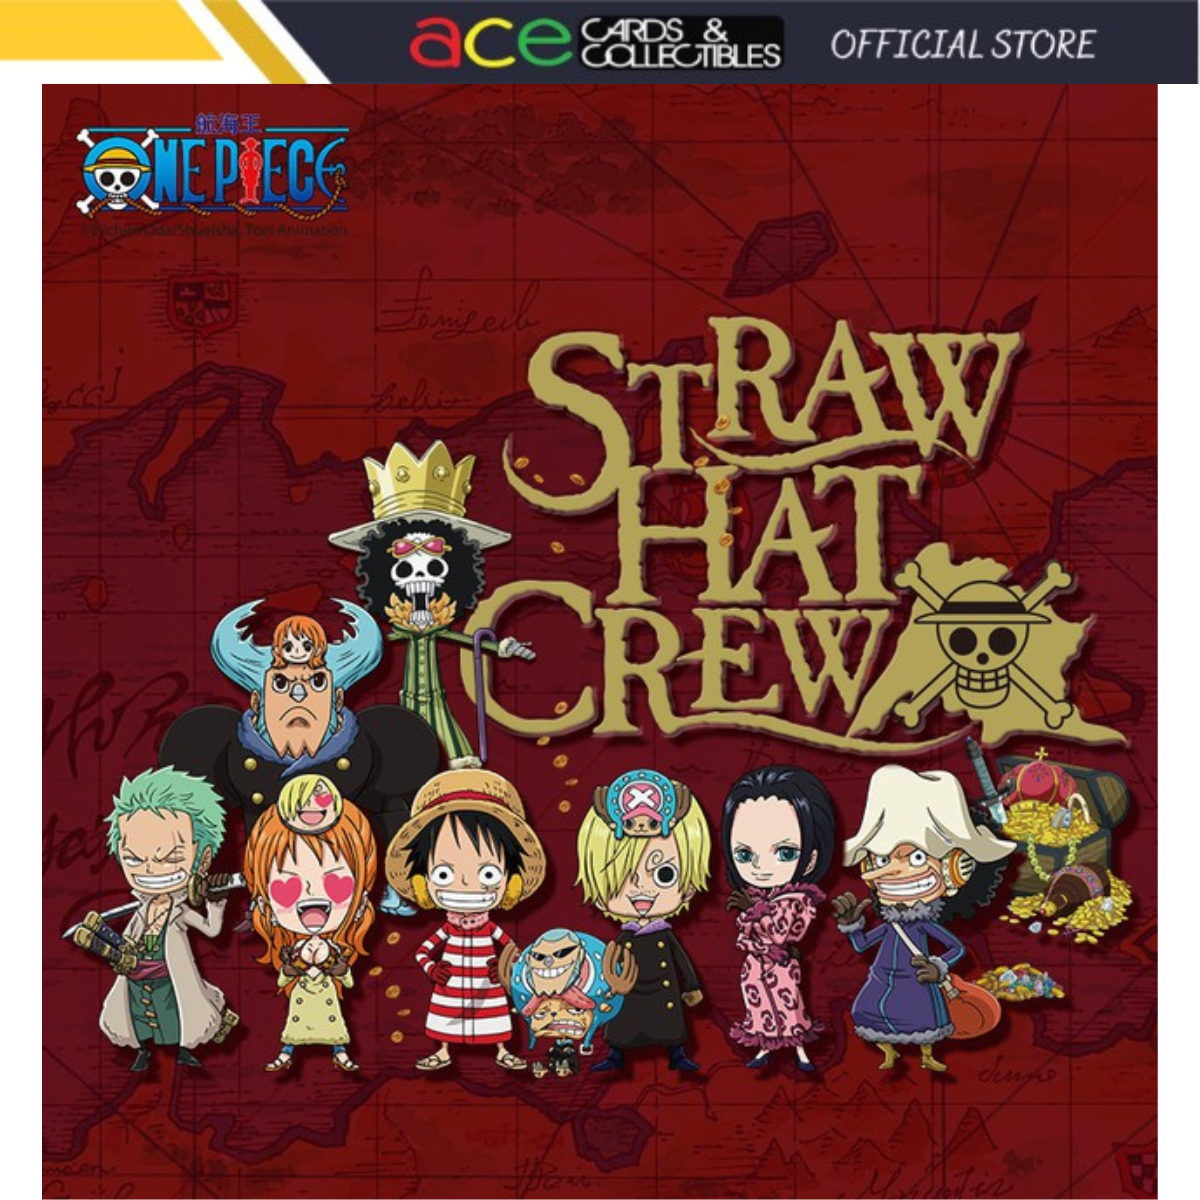 Win Main x One Piece 20th Anniversary Stamp Straw Hat Crew Series-Single Box (Random)-Win Main-Ace Cards & Collectibles